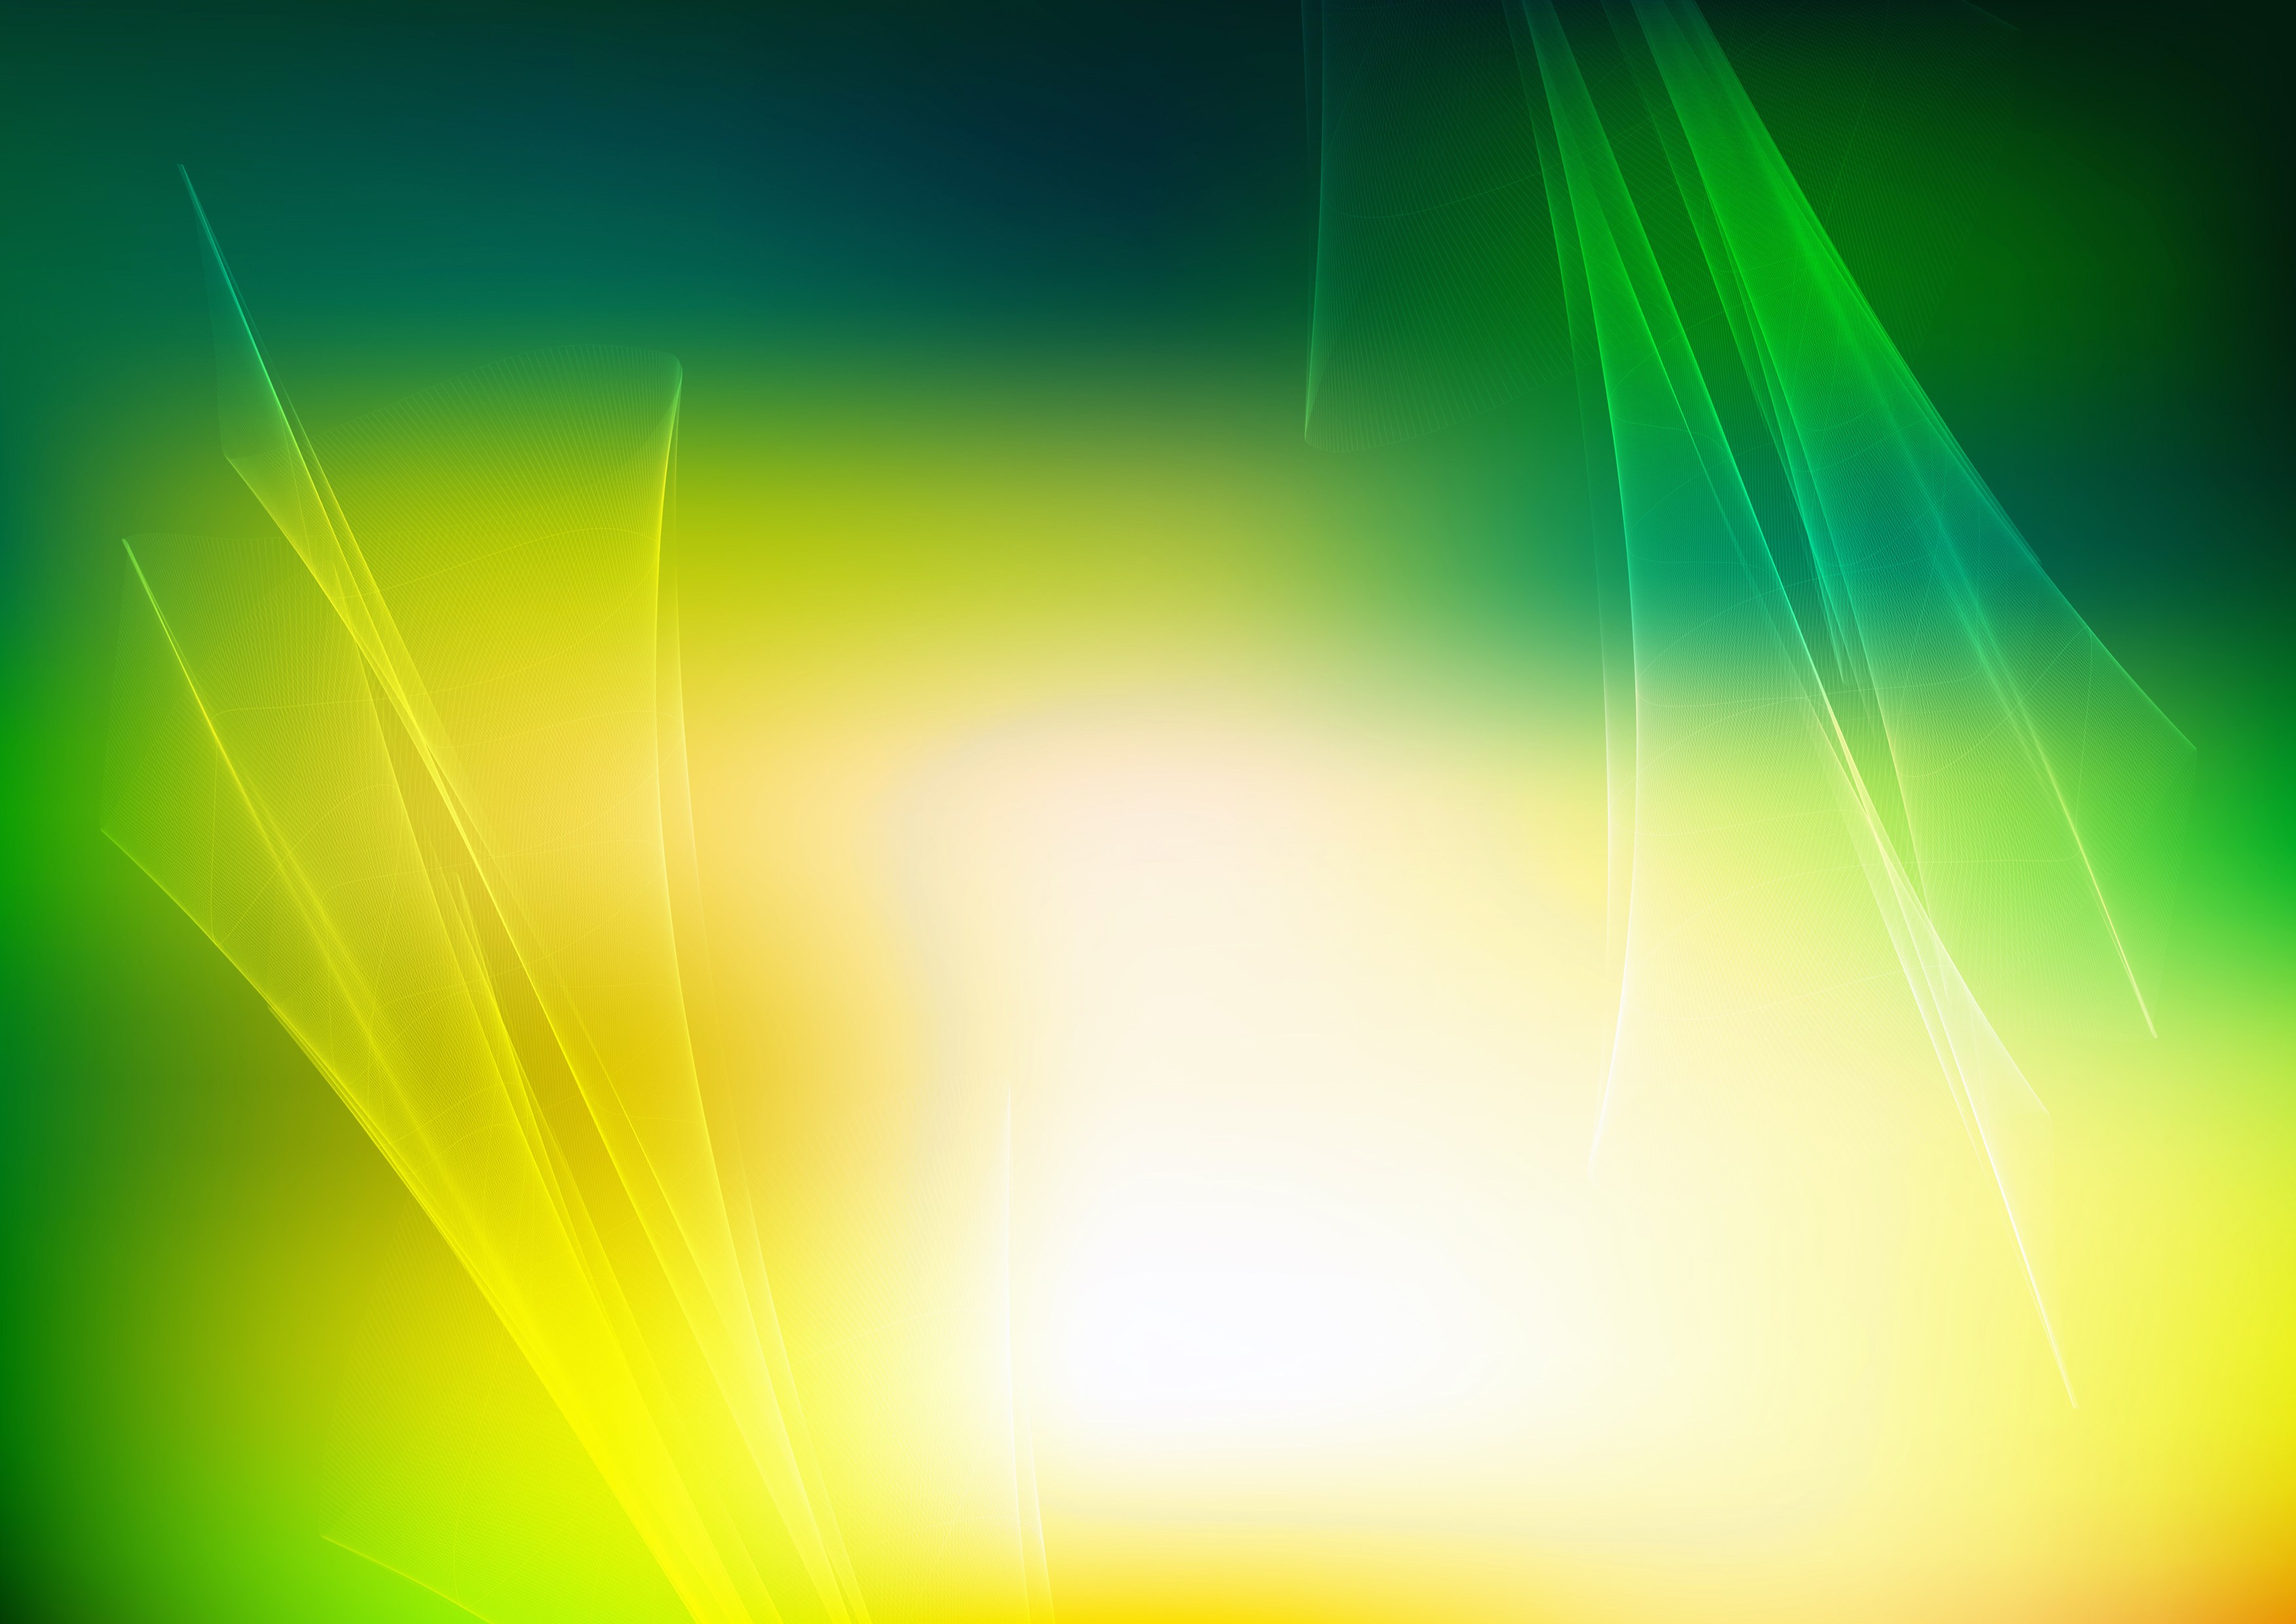 Abstract Green Yellow And White Fractal Wallpaper - Background Design Green  And Yellow - 3507x2481 Wallpaper 